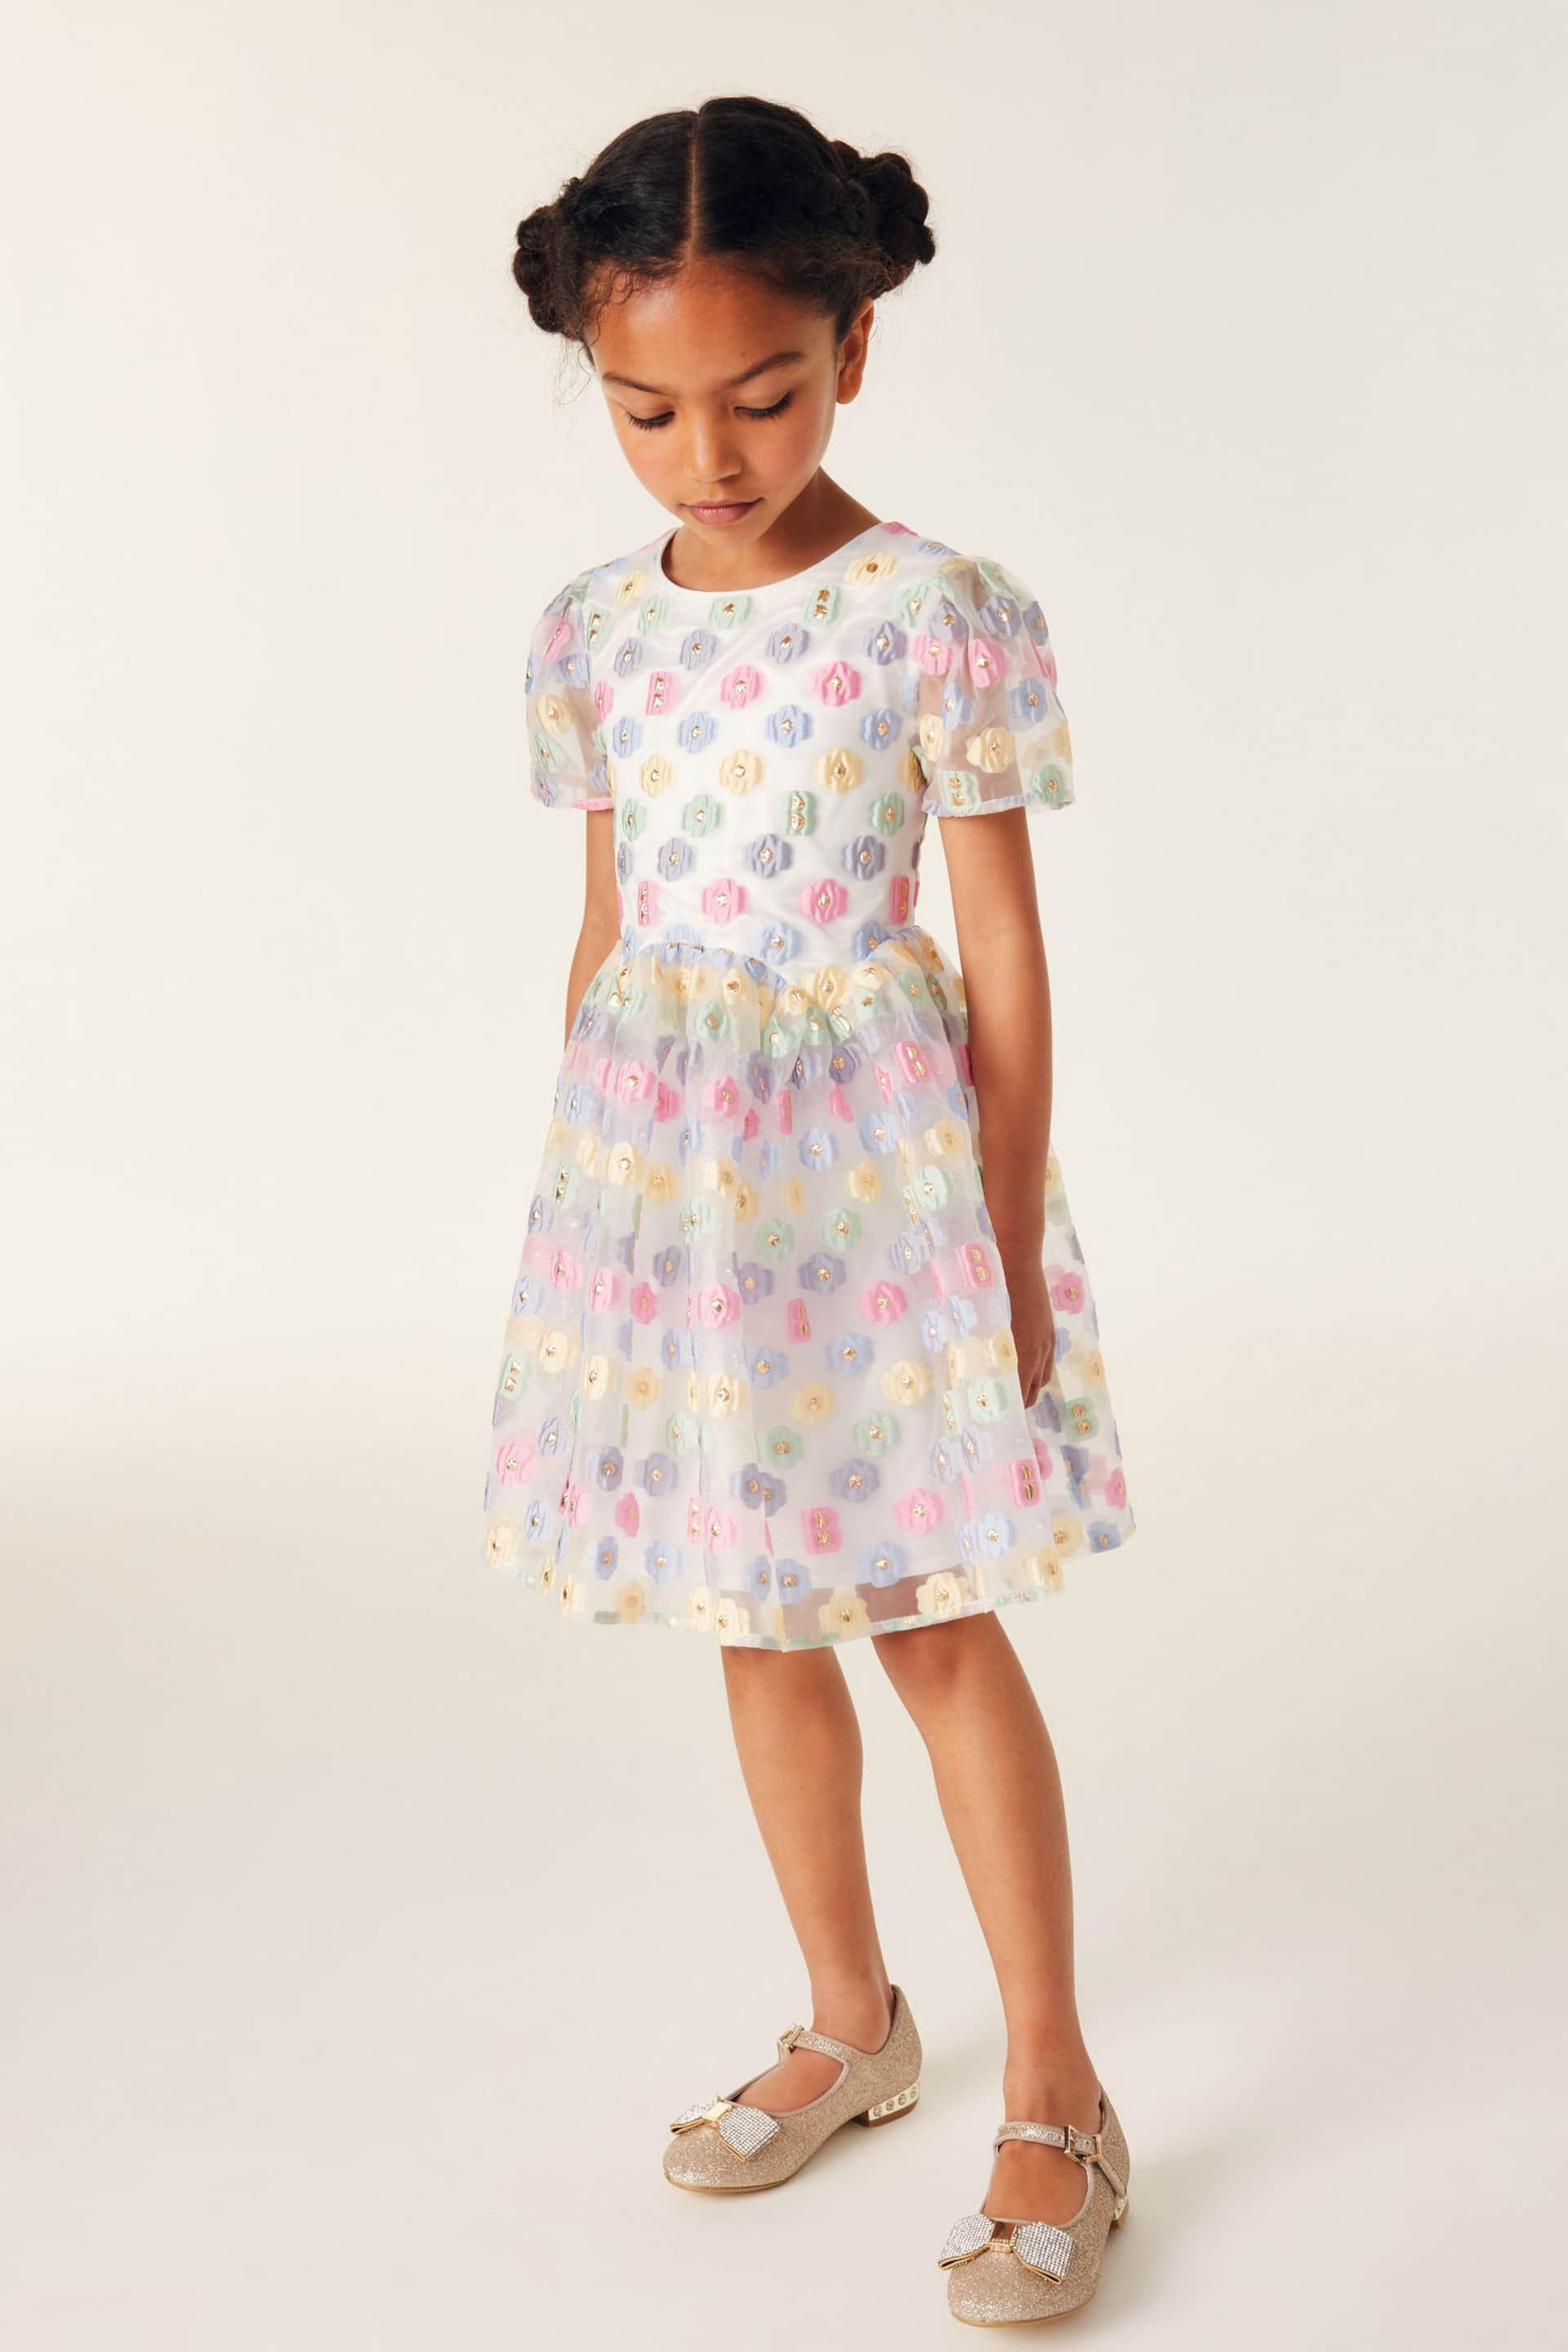 Baker by Ted Baker Multicolour Organza Dress - Image 1 of 8